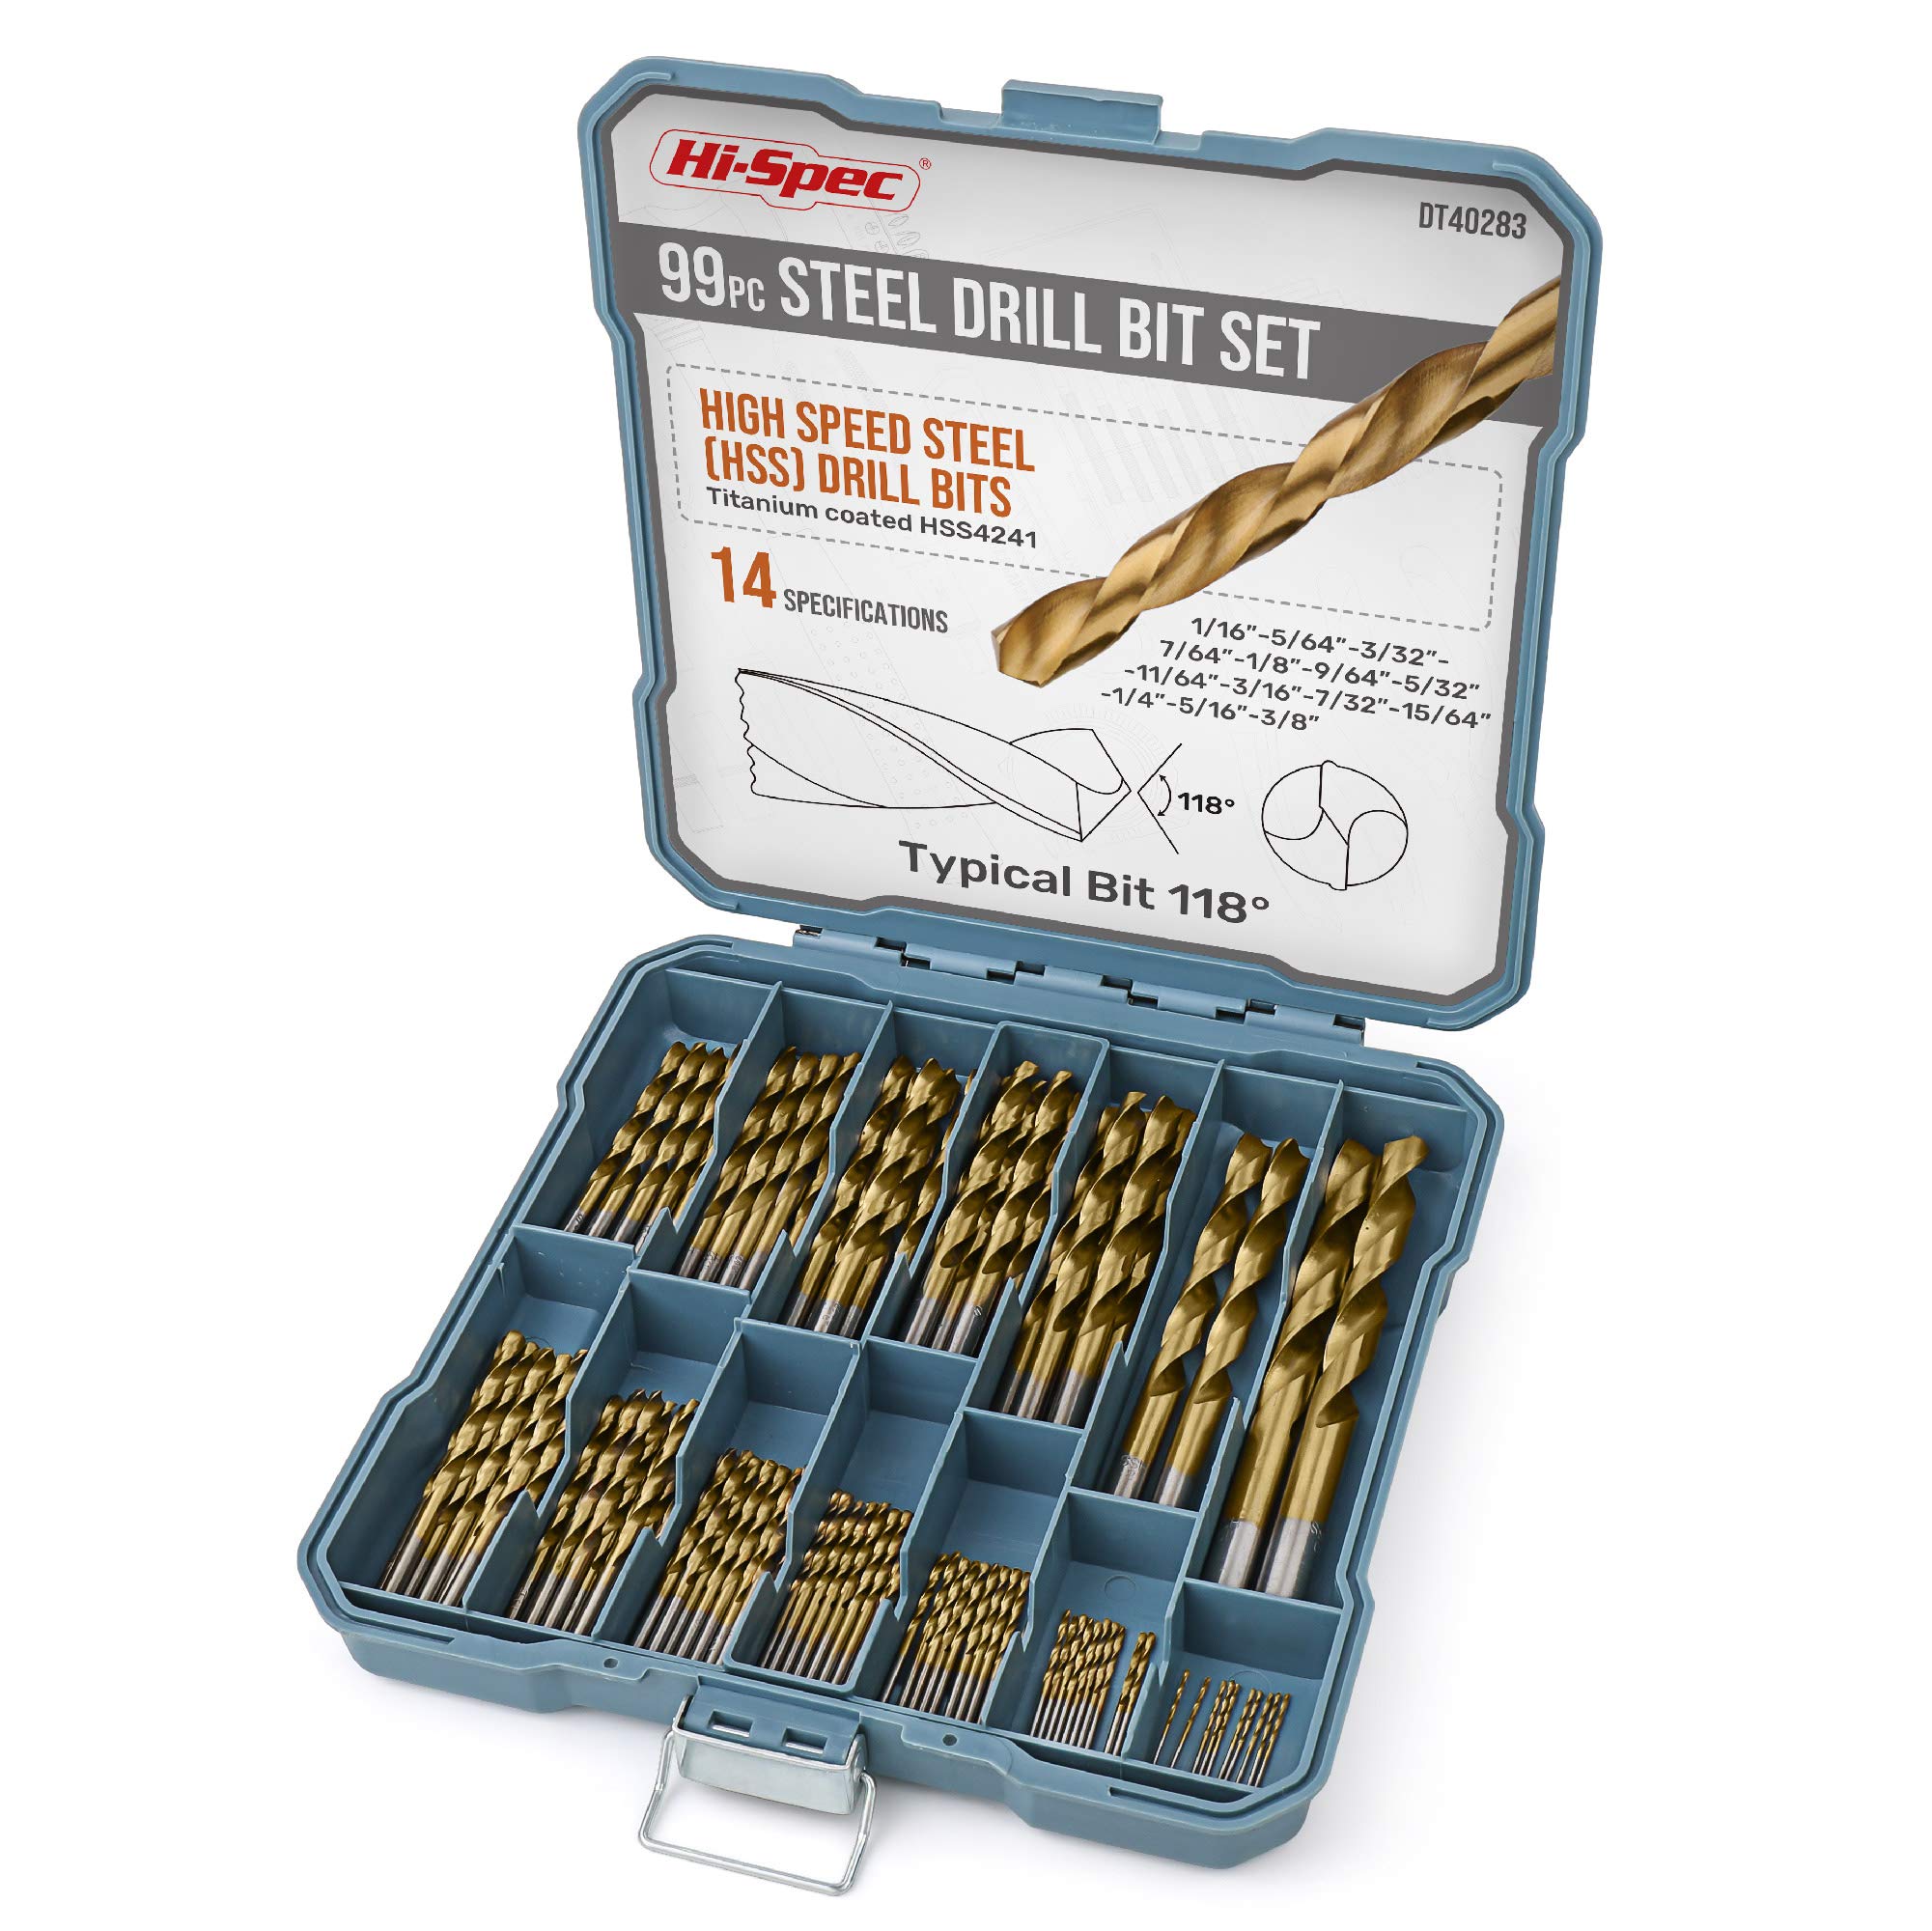 Hi-Spec 99 Piece SAE Multi Drill Bit Set. 14 Sizes from 1/16in to 3/8in. Metal, Wood, Drywall & Plastics Drilling with HSS Titanium Steel Bits. Complete in a Tray Case